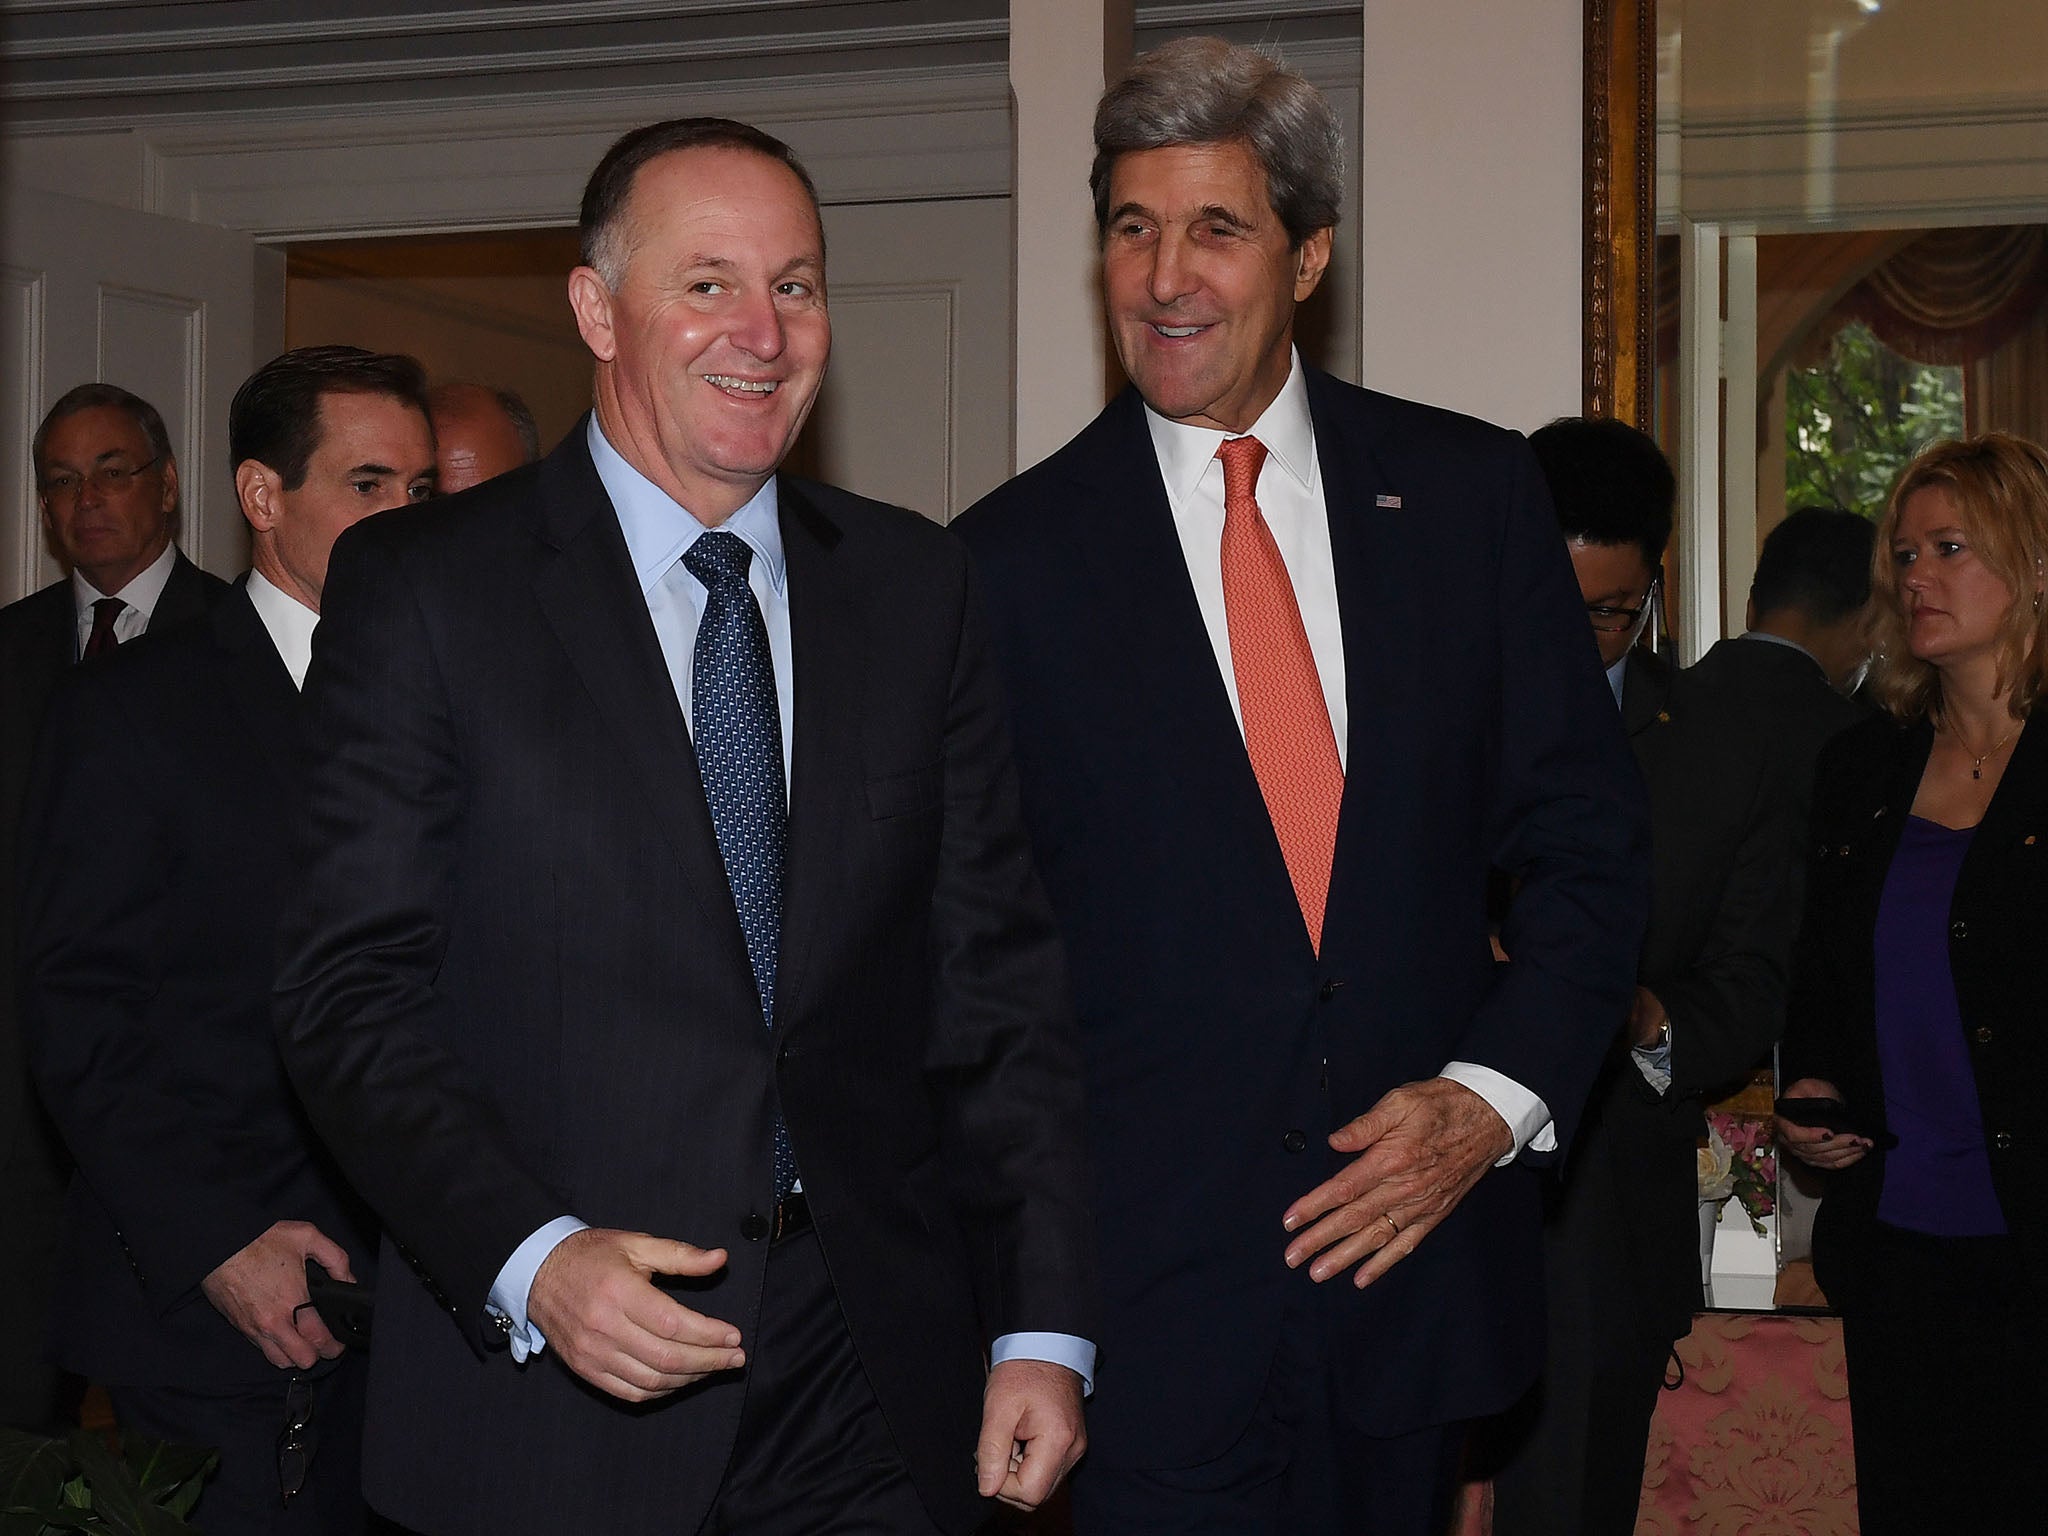 John Key, seen here with US Secretary of State John Kerry has said that the 11 countries of the TPP move forward with the deal